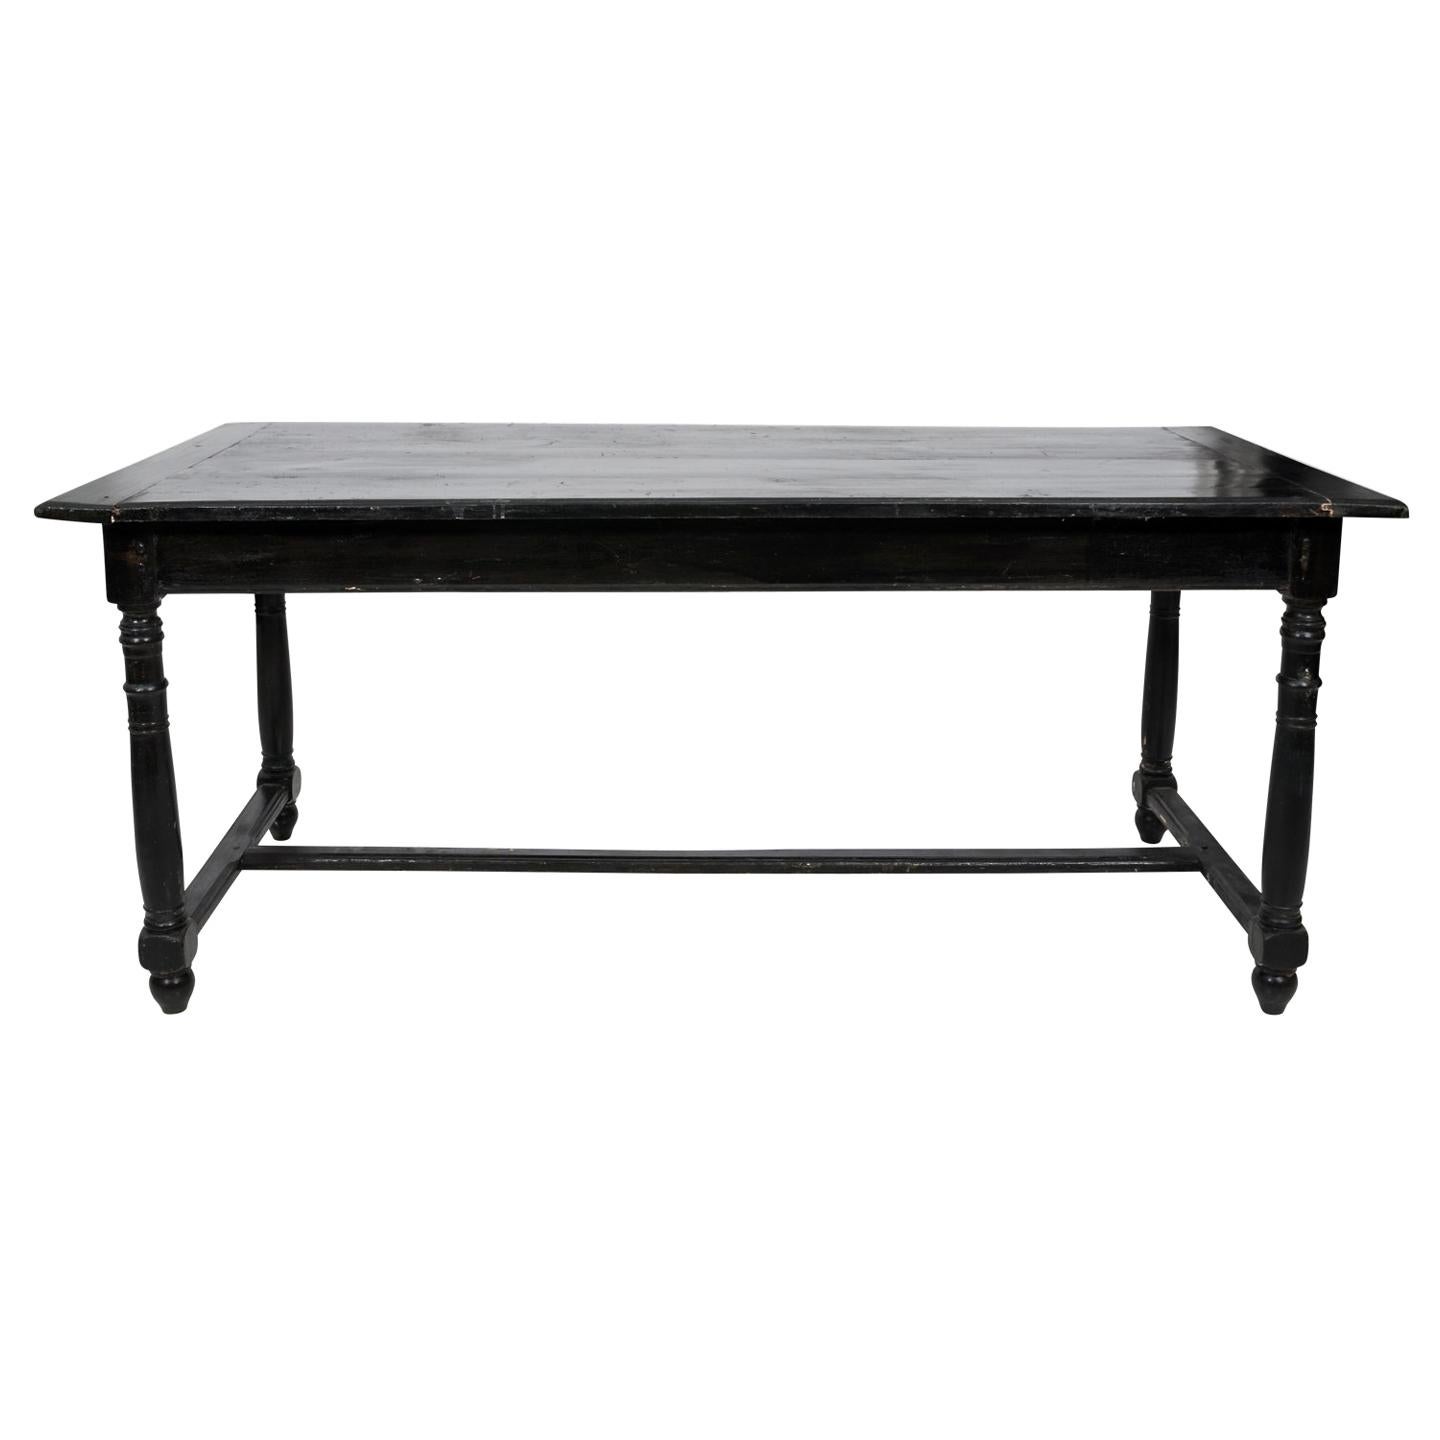 Black Painted French Country Dining Table, circa 1870